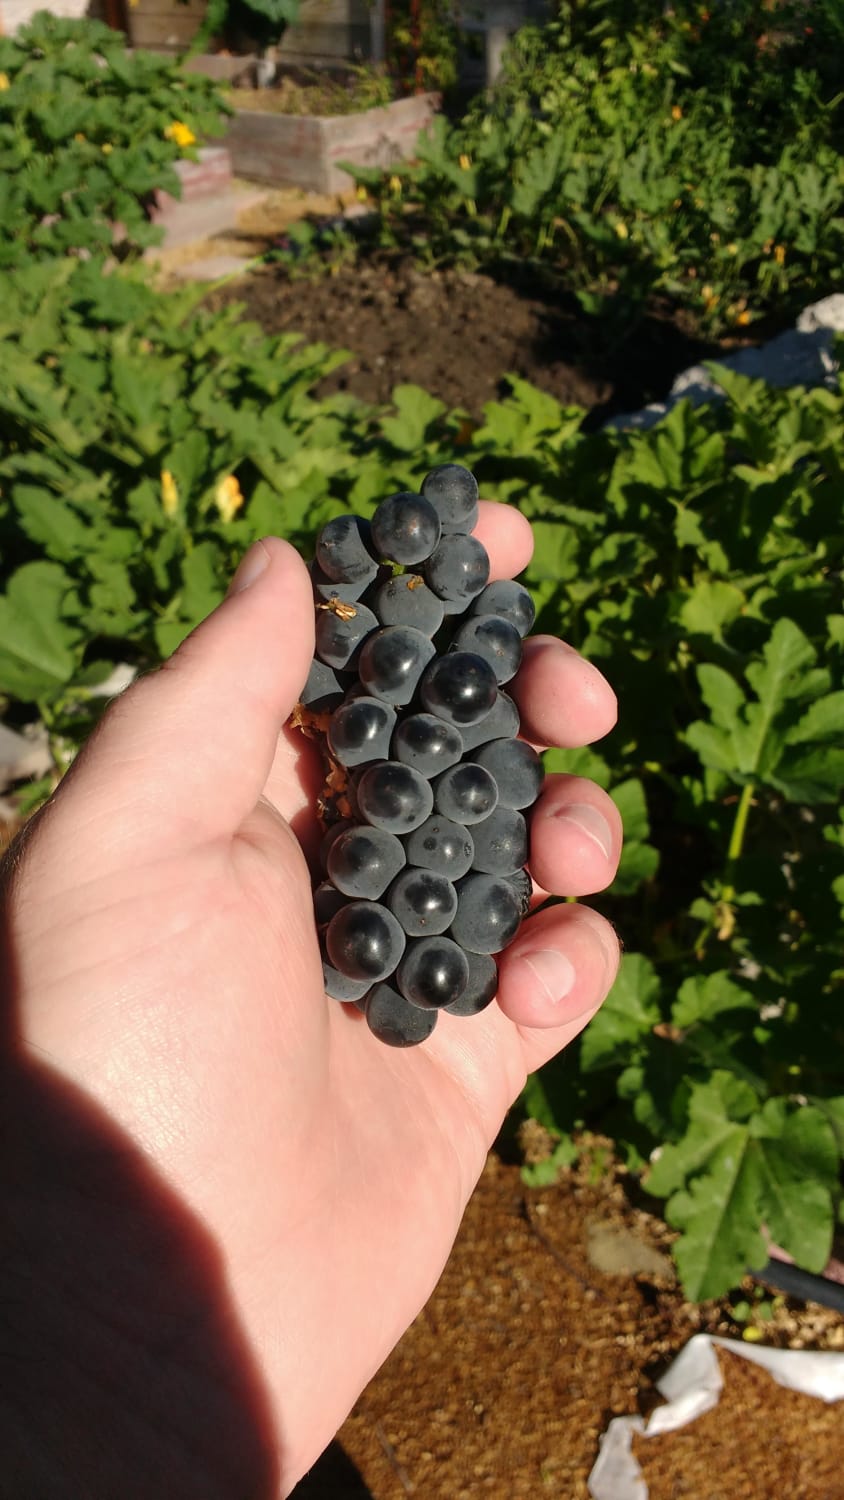 First grapes from first grape harvest. We planted the vines spring 2019.